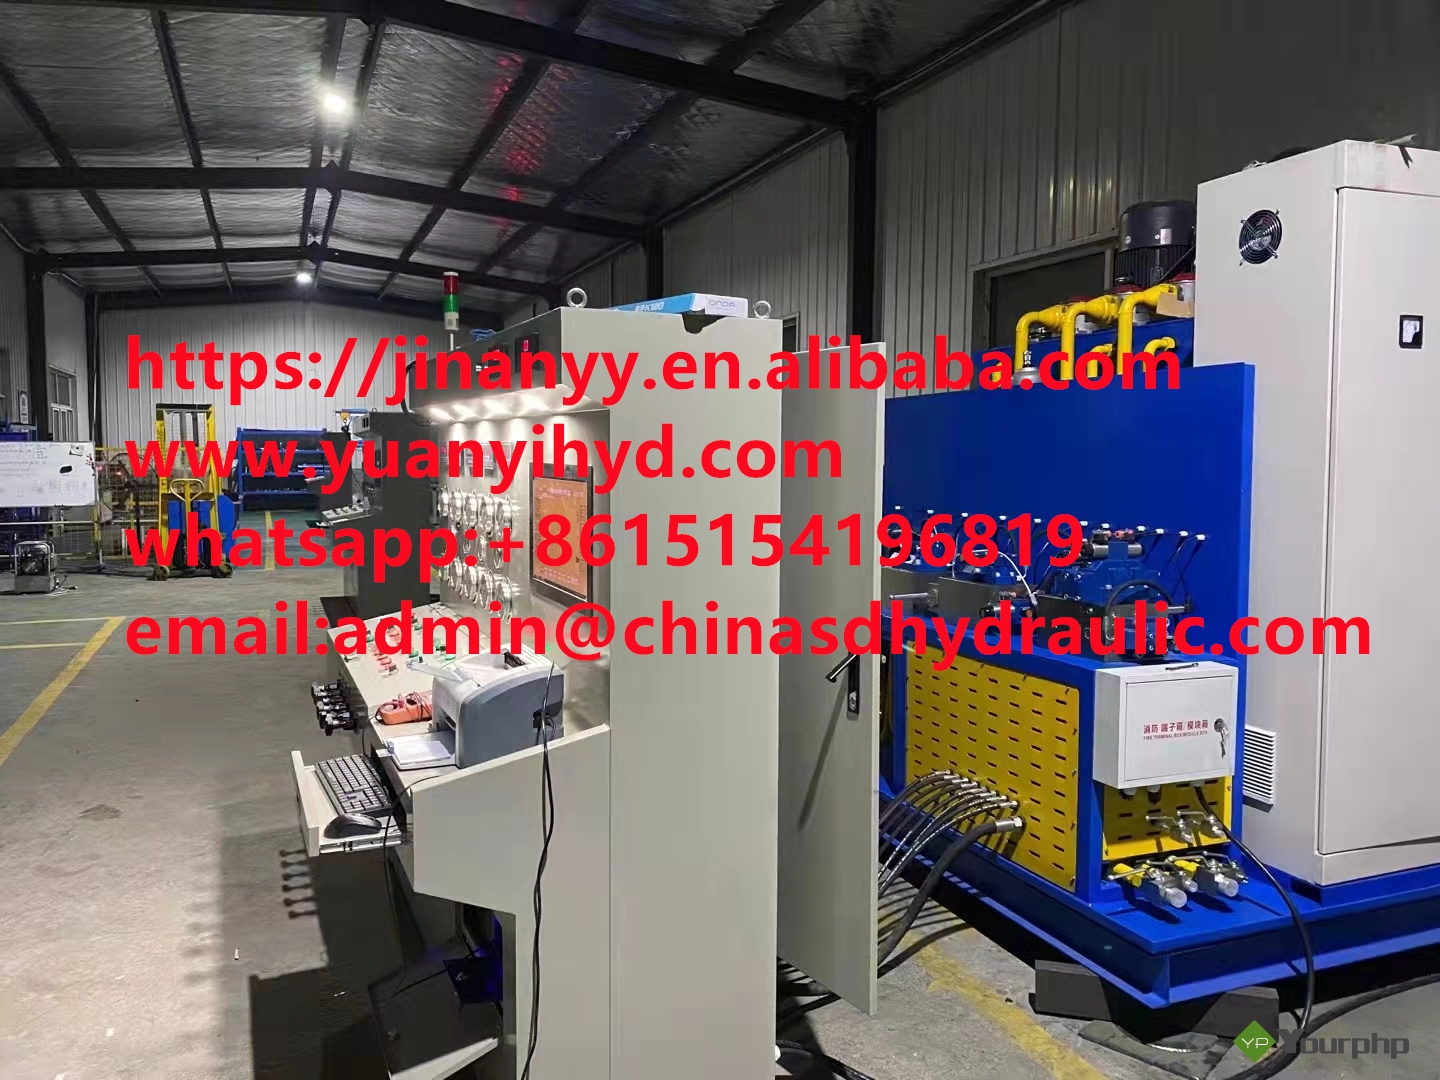 Hydraulic pump and Motor test bed,Rexroth Piston Pump Test Bed